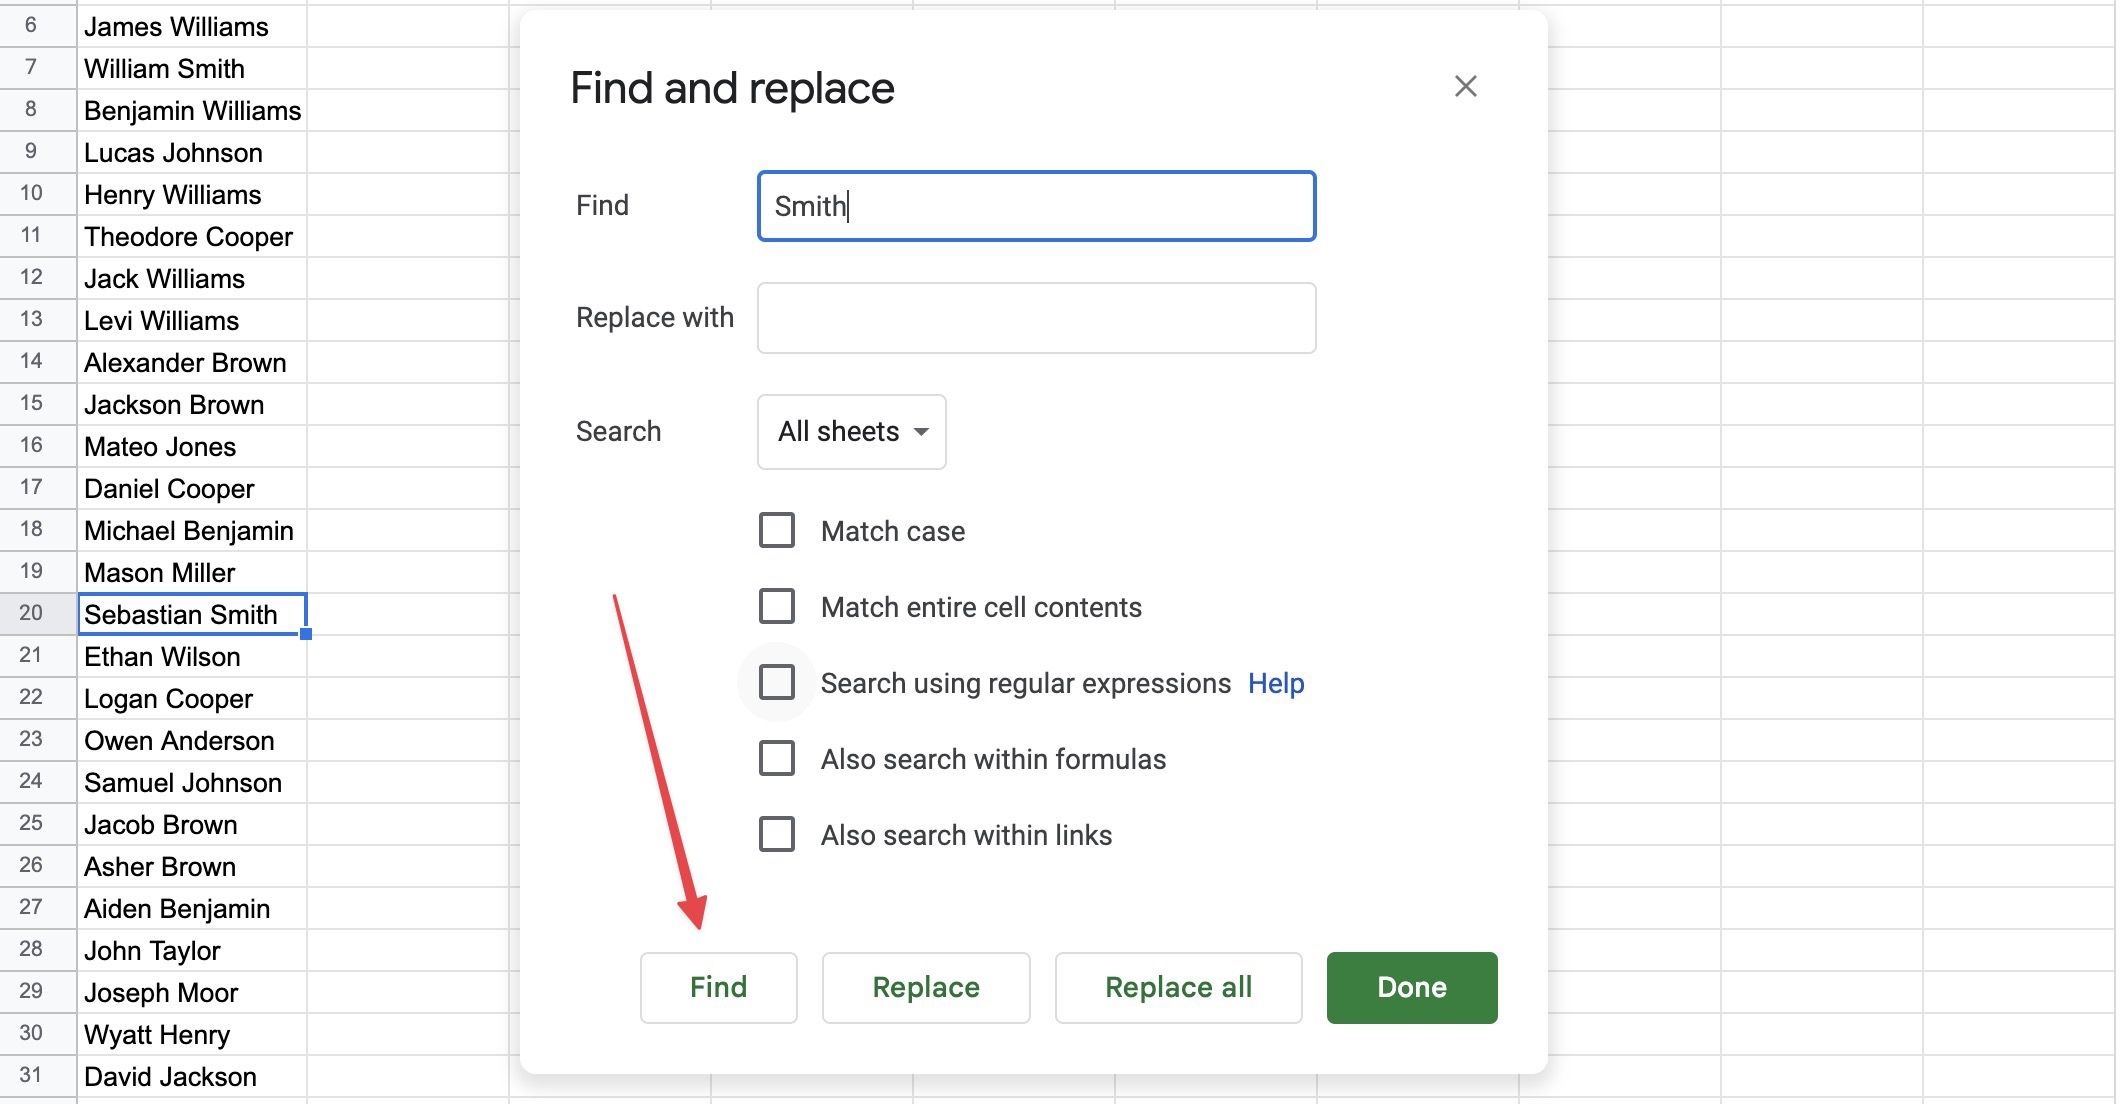 Using the Find and replace feature in Google Sheets